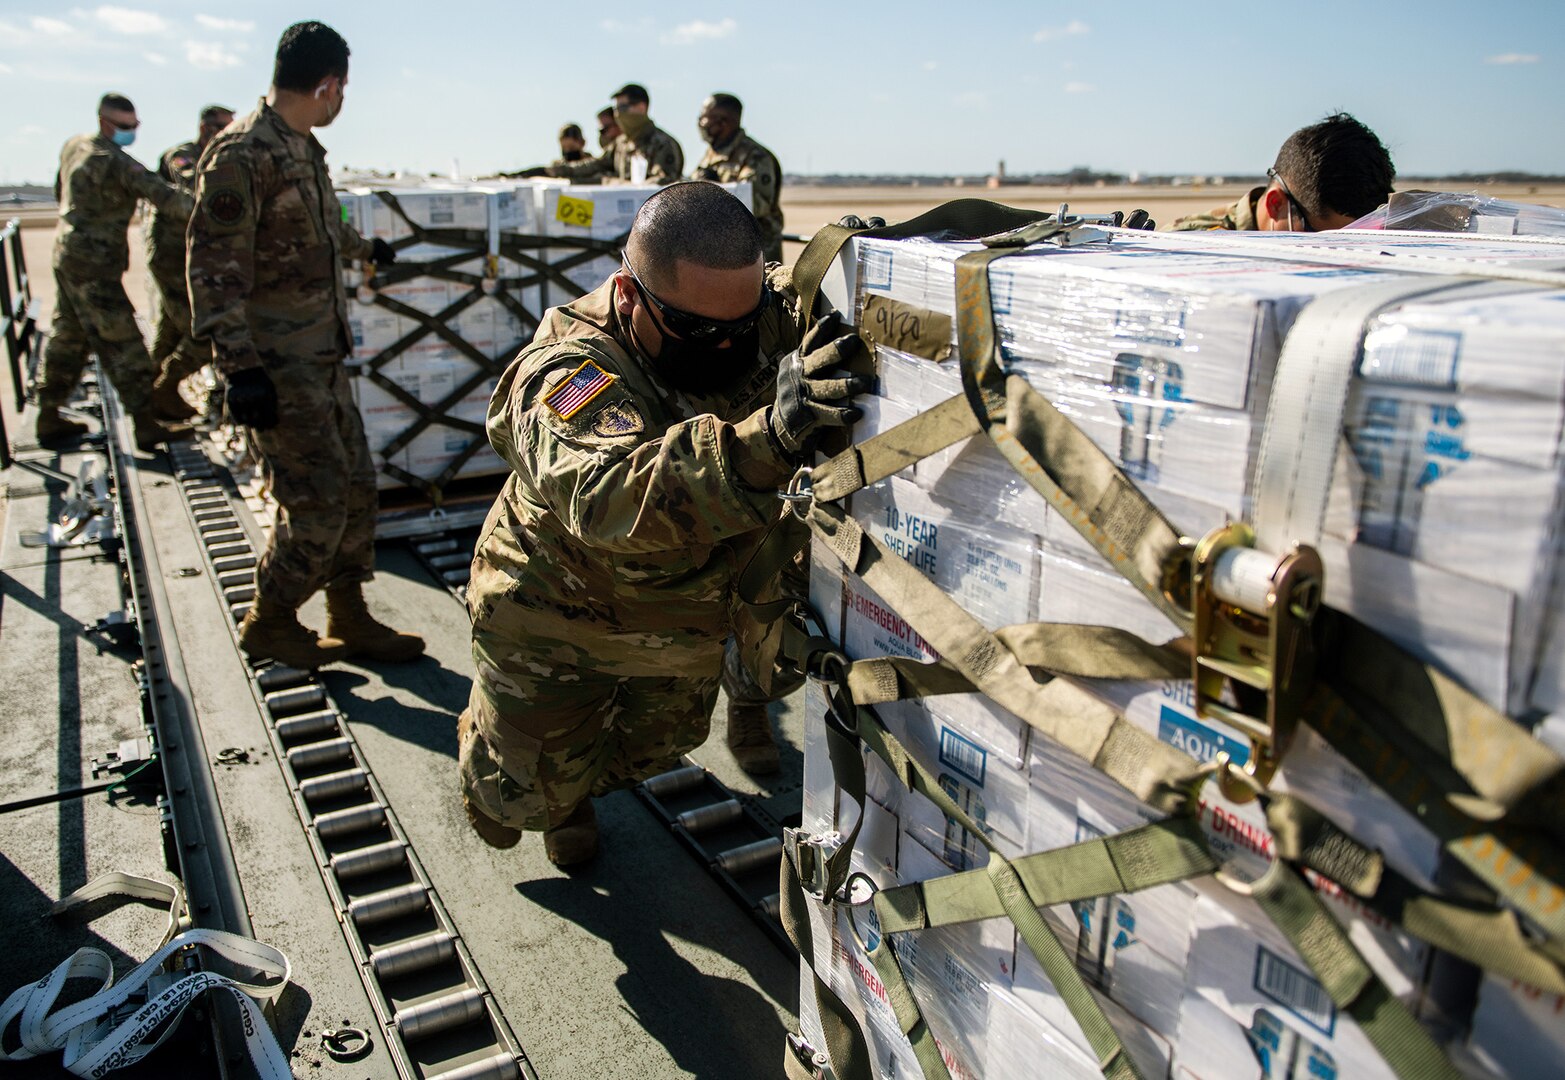 U.S. Air Force Airmen and Army Soldiers unload pallets of bottled water Feb. 21 at Joint Base San Antonio-Kelly Field. Joint Base San Antonio provided emergency response assistance to local officials and agencies in order to ensure the safety and security of the community during and after the severe winter storm.